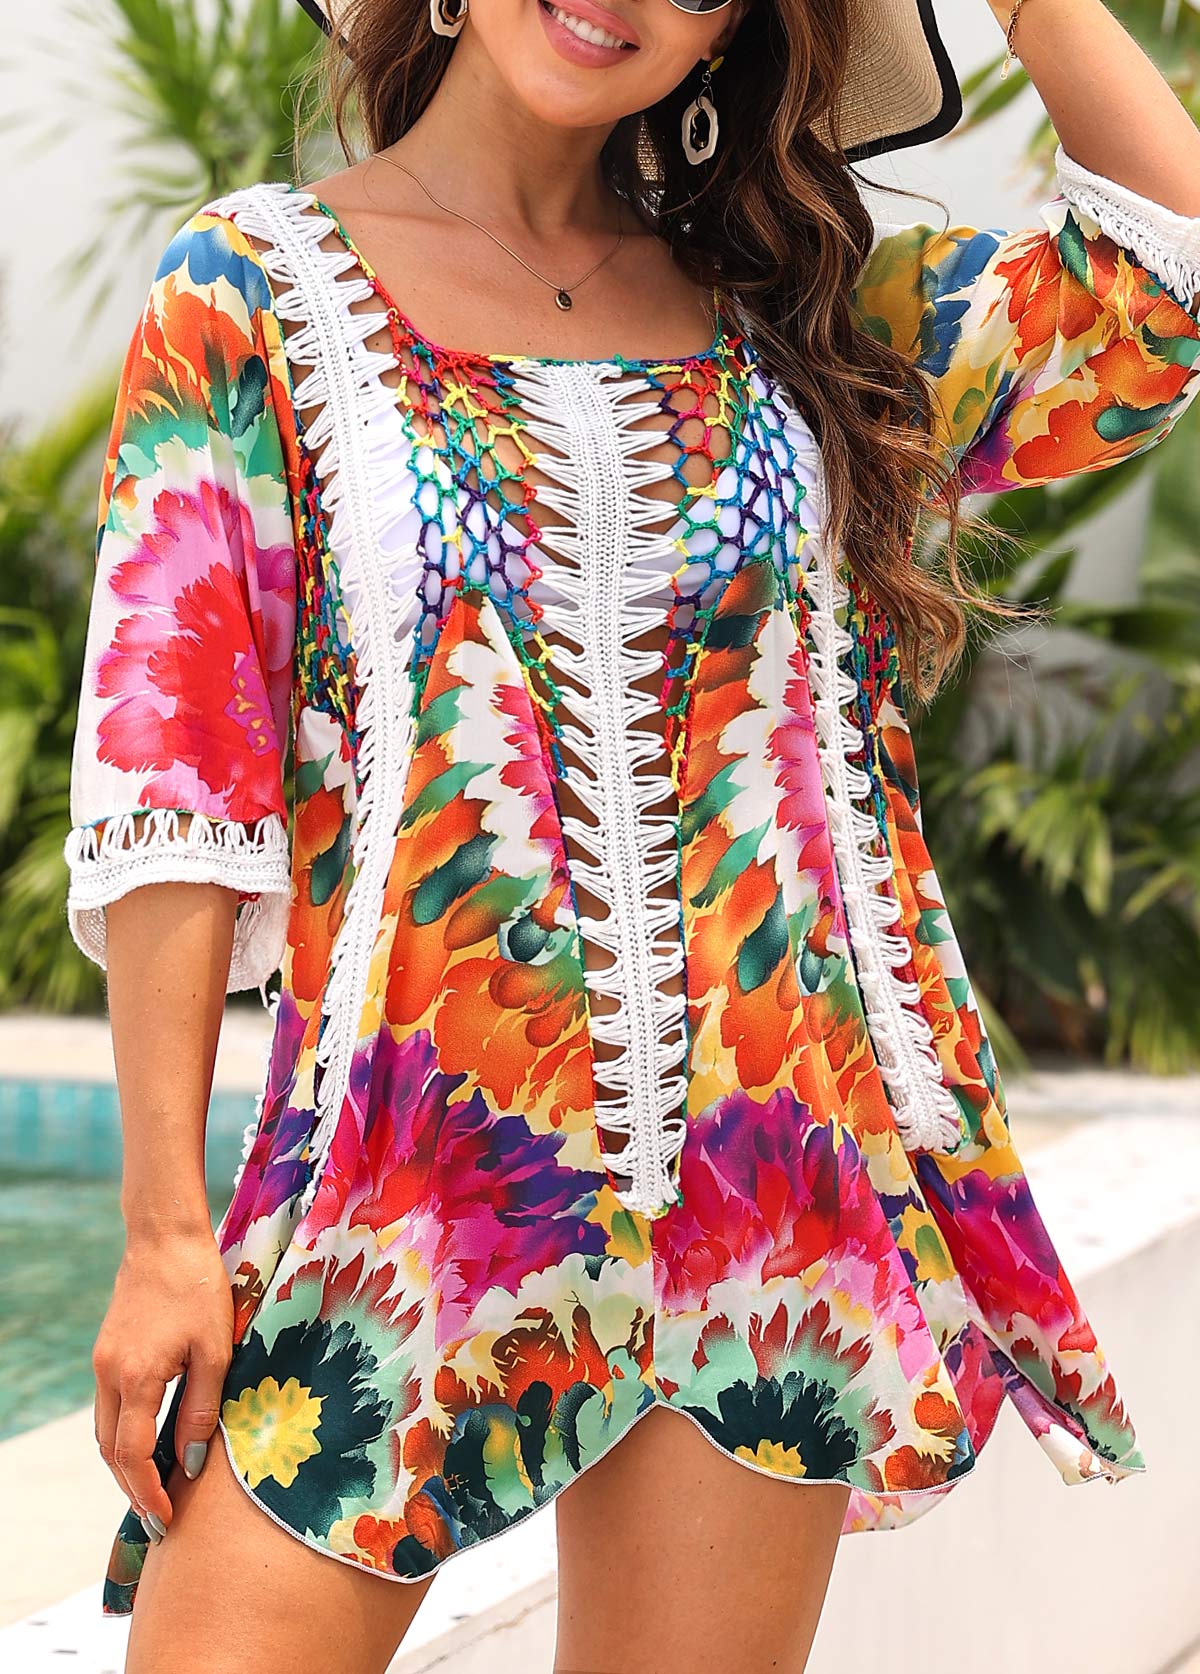 Patchwork Tie Dye Print Multi Color Cover Up